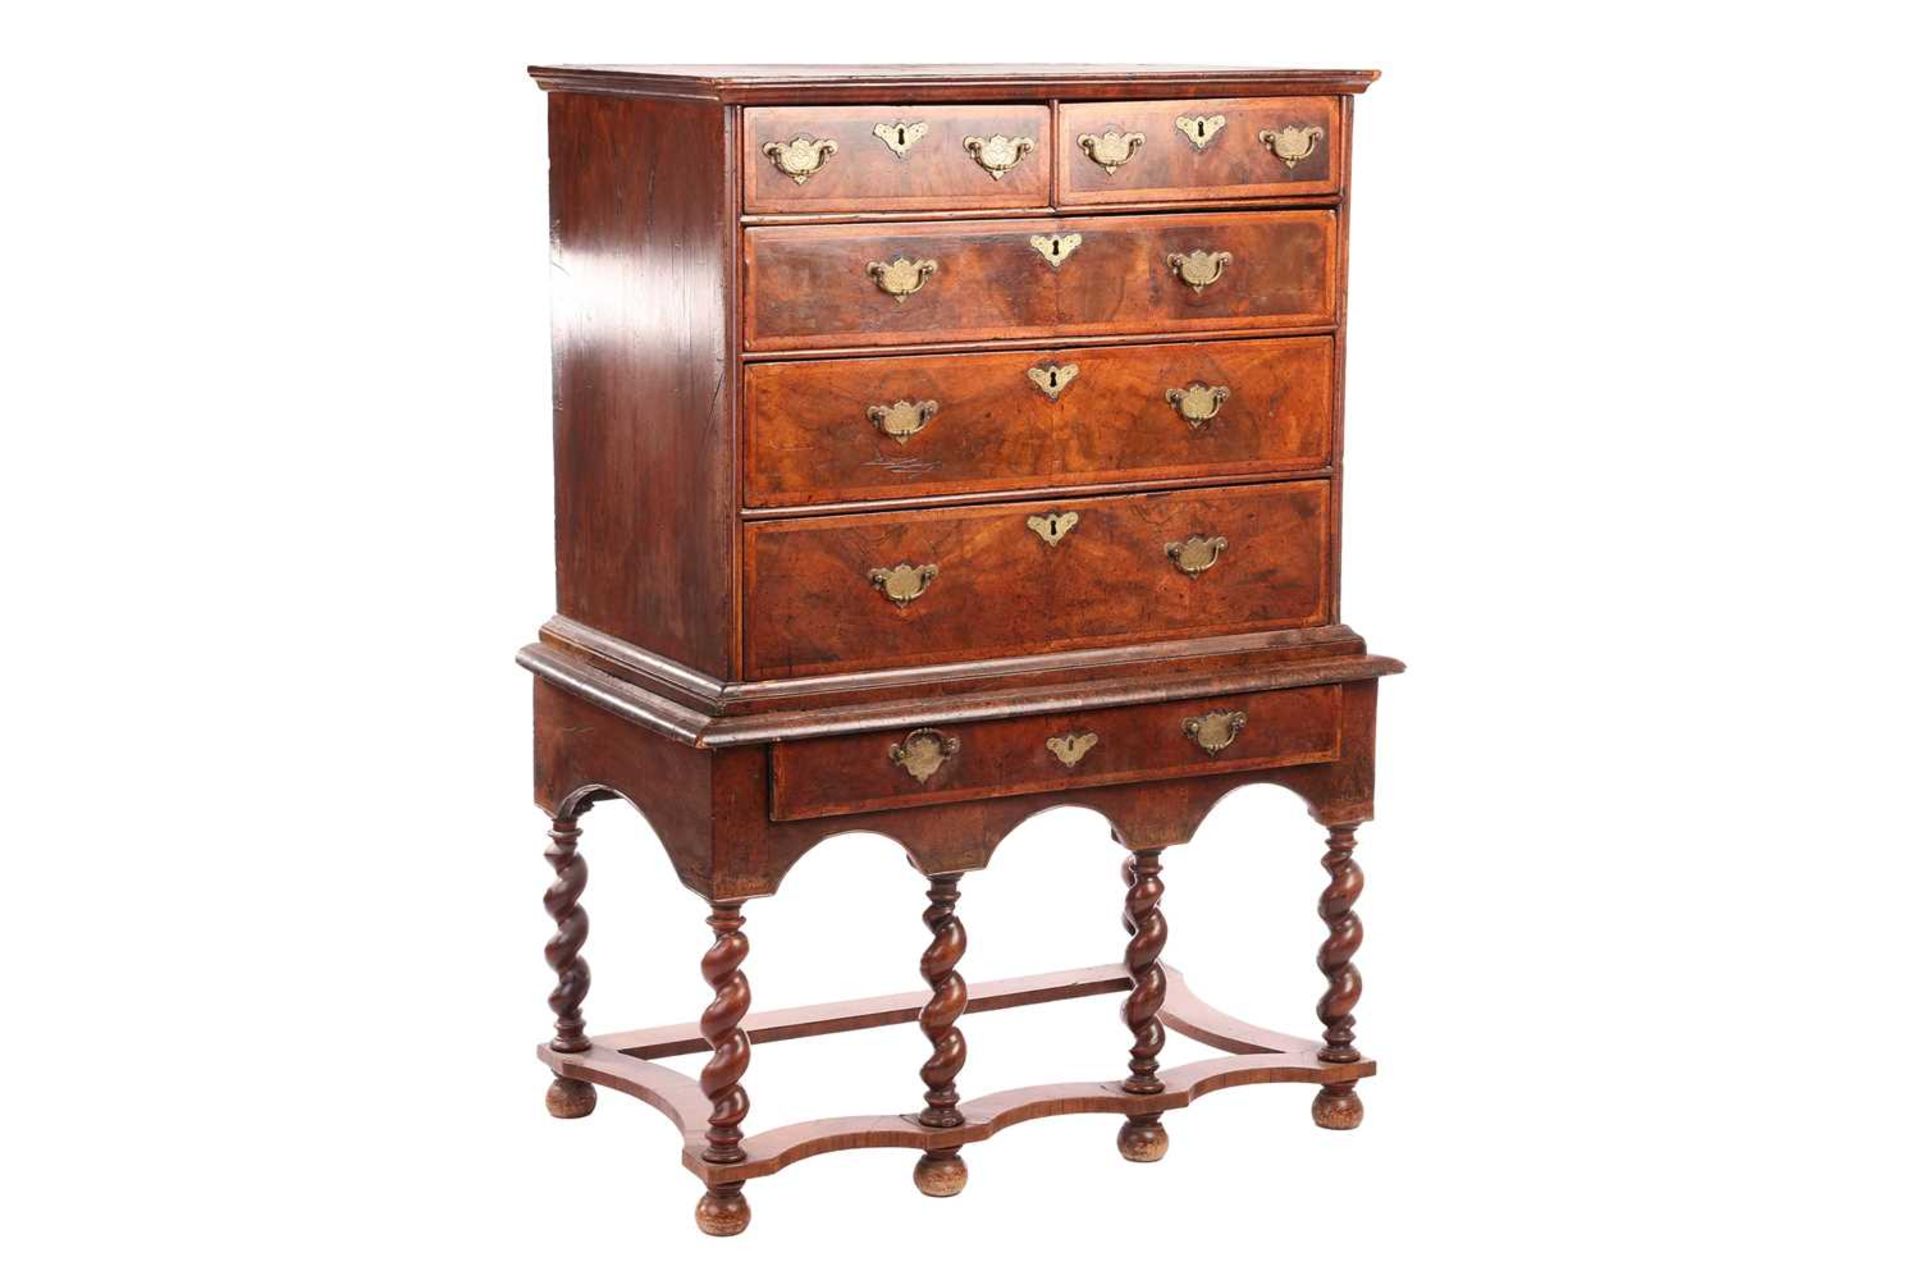 A 17th-century and later figured walnut chest on stand, the upper section with quarter veneered top  - Image 7 of 7